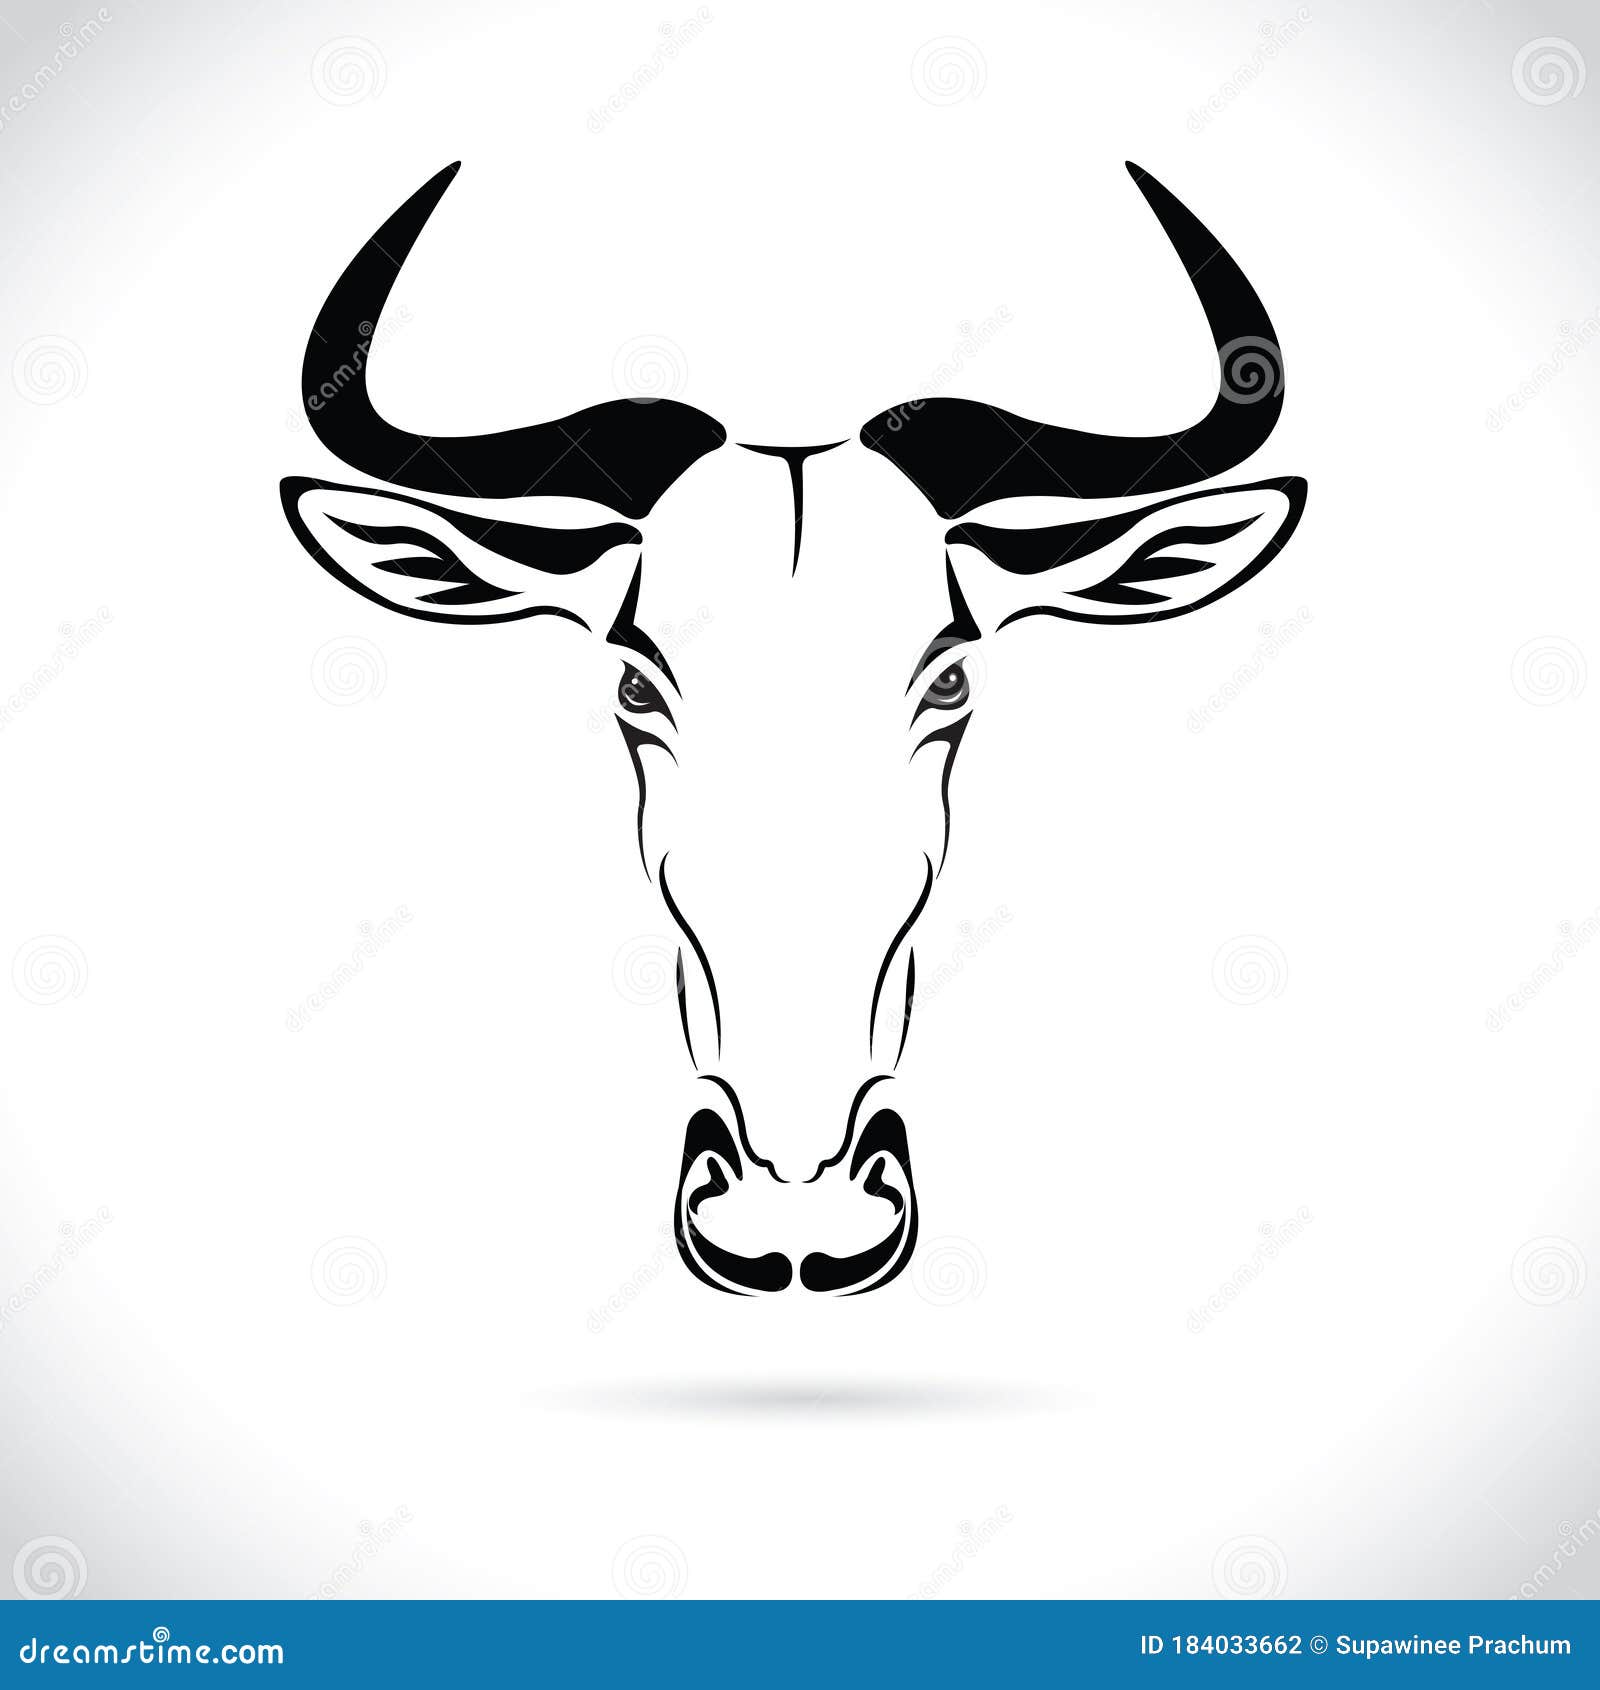  image of an wildebeest head  on the white background